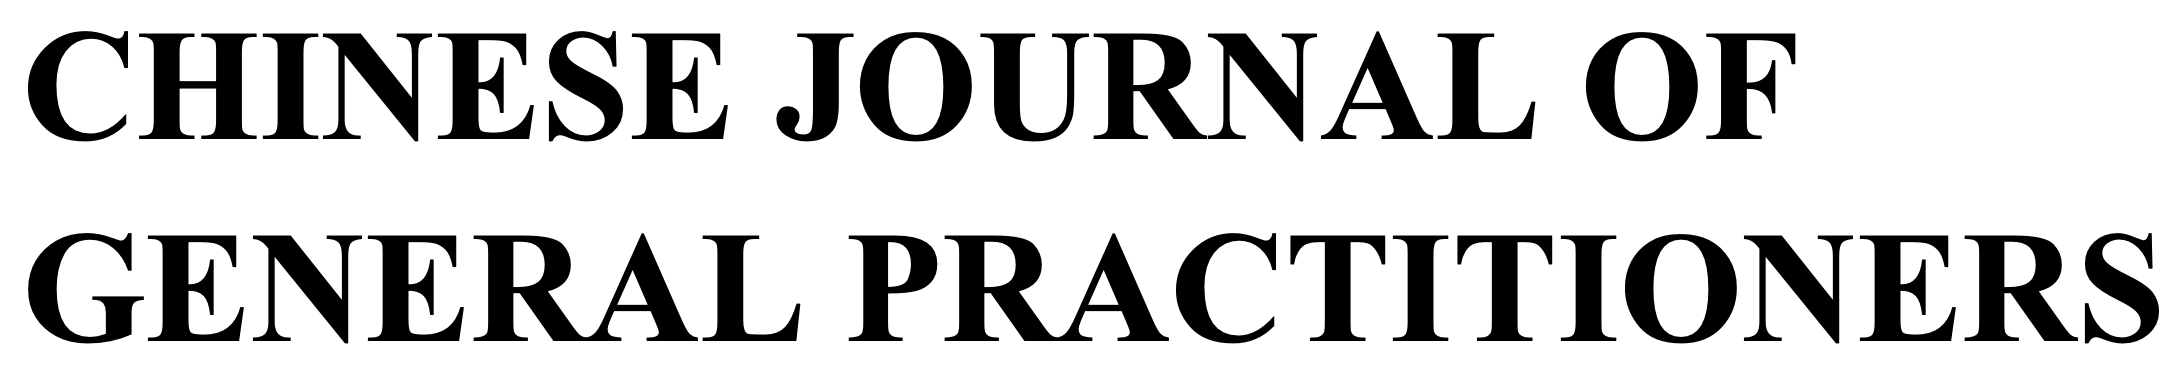 chinese journal of general practitioners logo